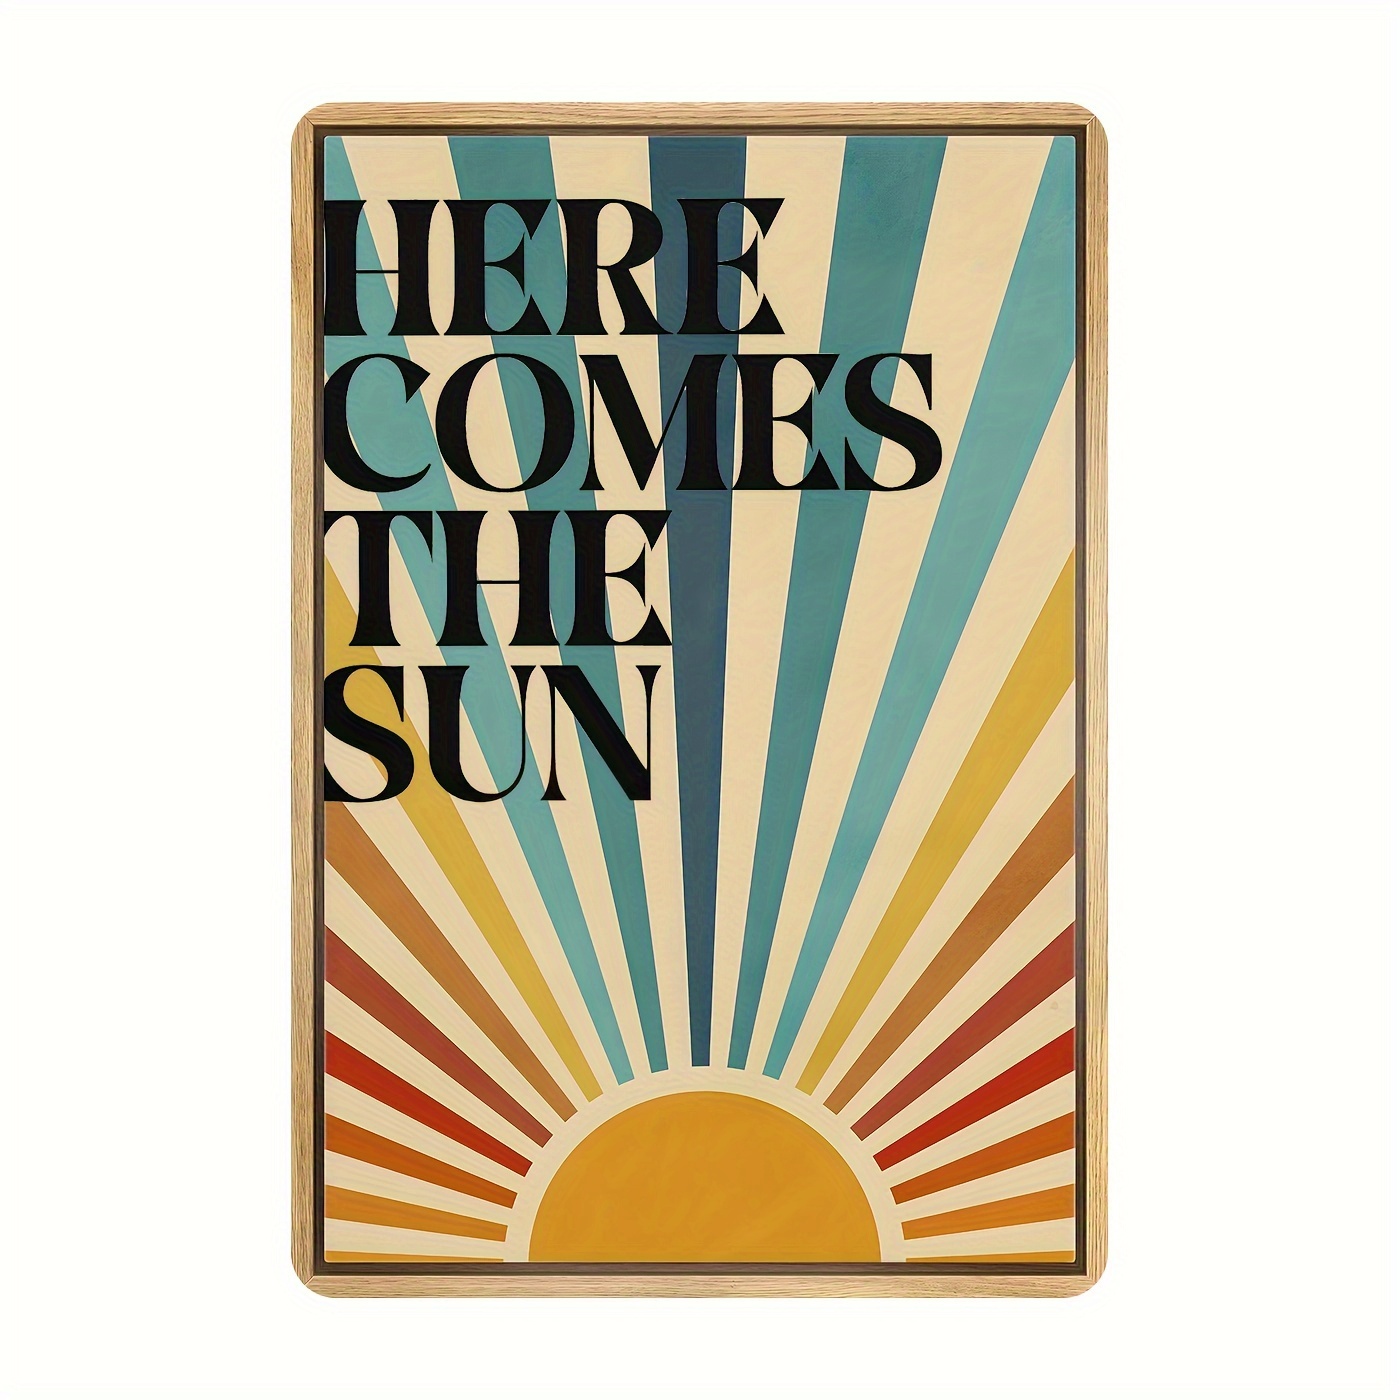 

Here Comes The Sun Metal Tin Sign 8x12 Inch - Vintage Wall Art Decor Plaque For Home Bar Club Living Room Garage Man Cave Gift